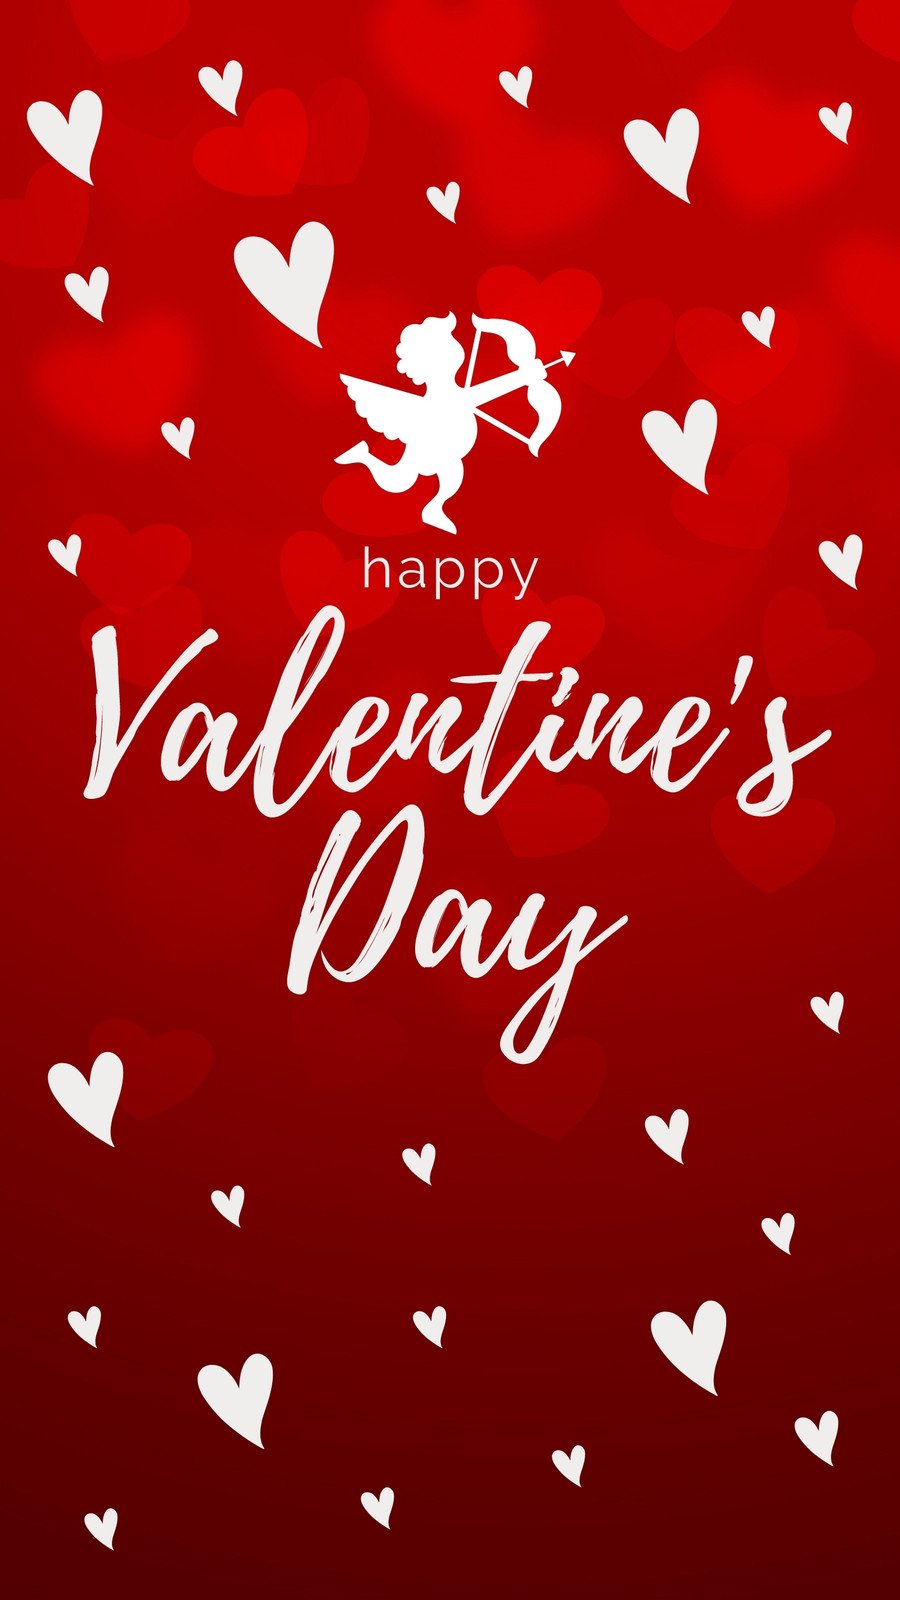 https://marketplace.canva.com/EAE0UFAdLCE/1/0/900w/canva-red-simple-aesthetic-happy-valentines-day-instagram-story-6MSMeyIPZus.jpg